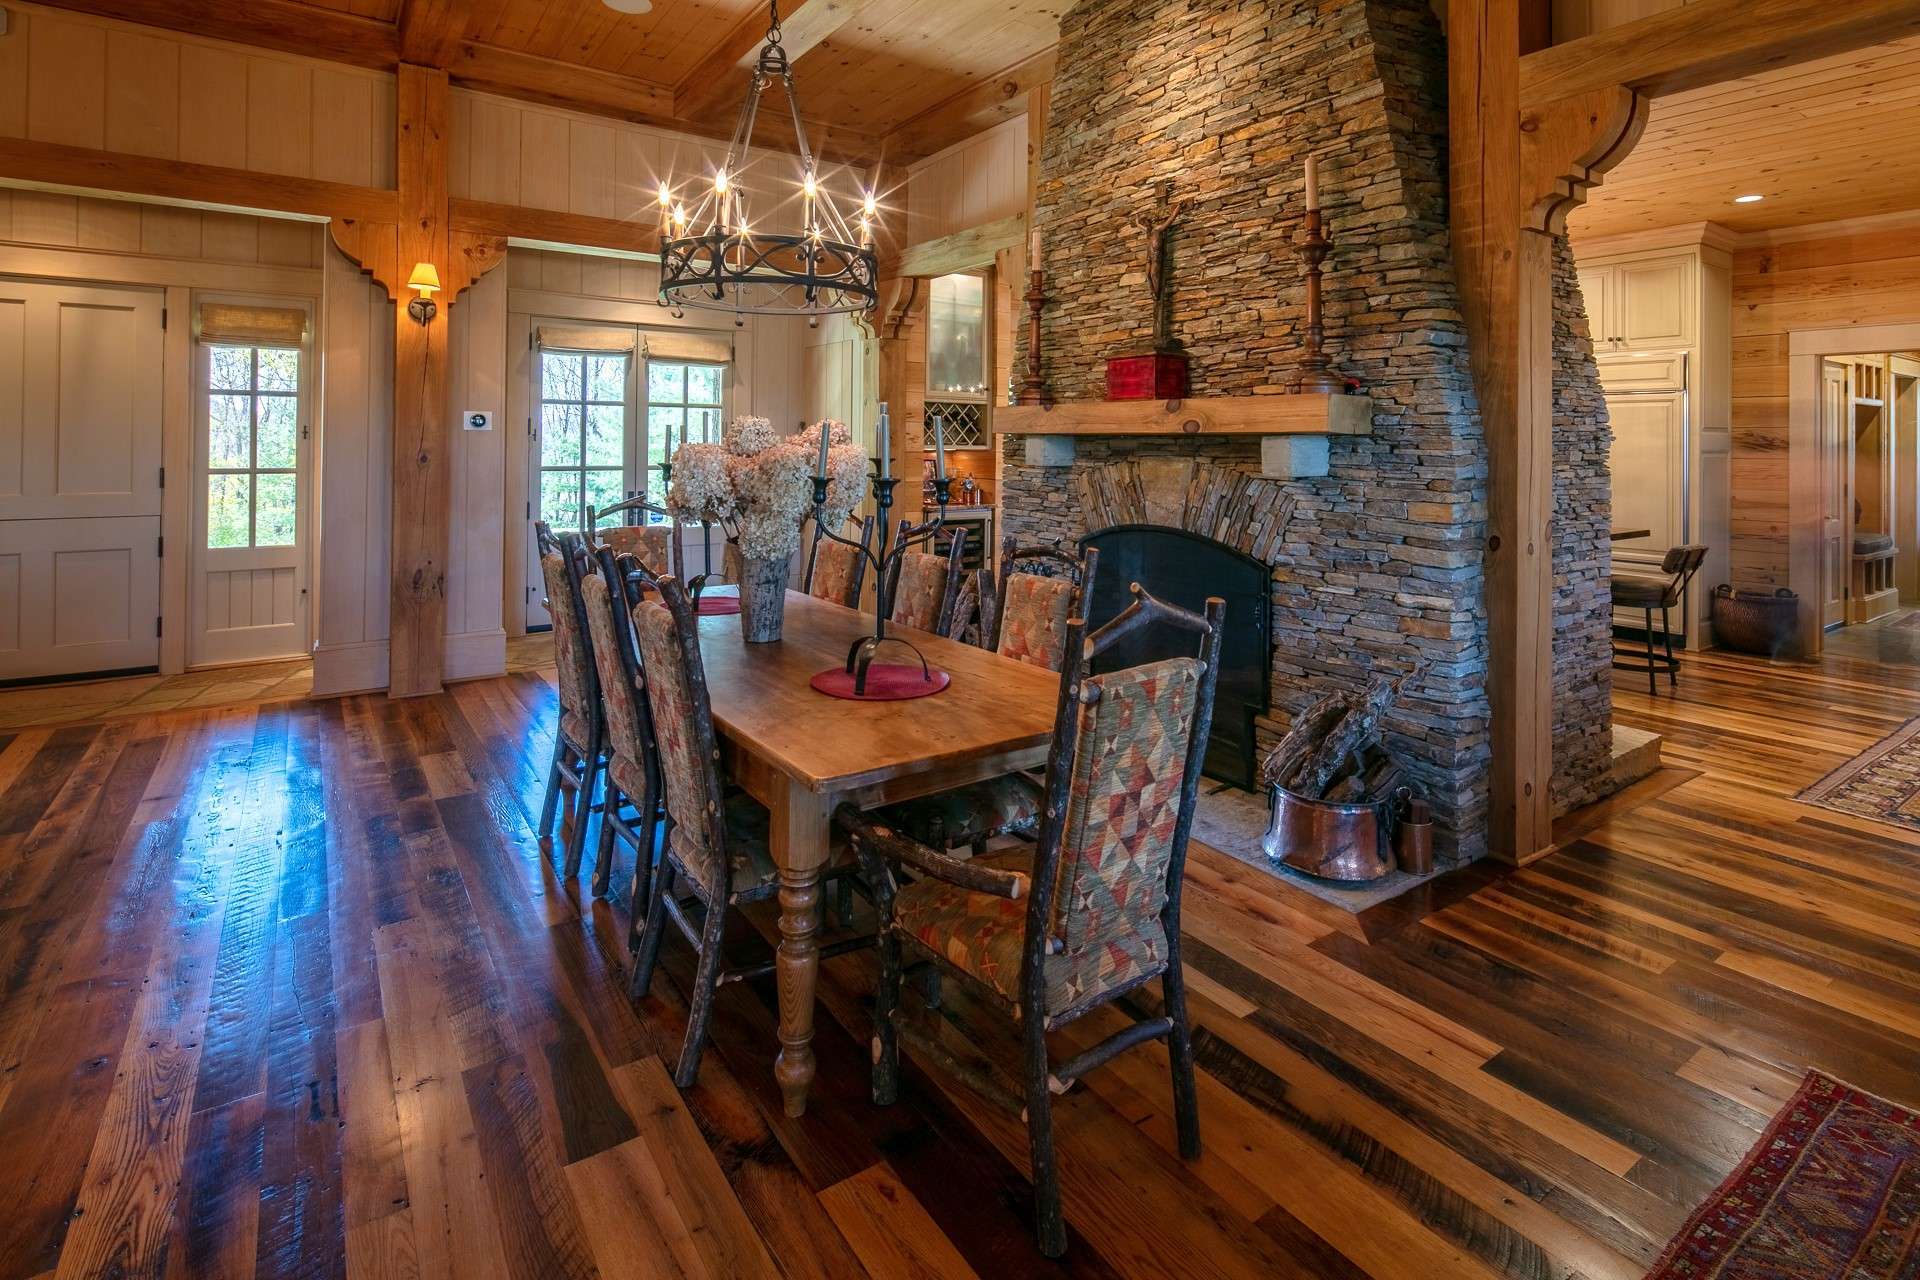 There are plenty of areas for both formal and casual dining.  The great room offers formal dining by the fireplace as well as a nook featuring a unique vaulted ceiling.